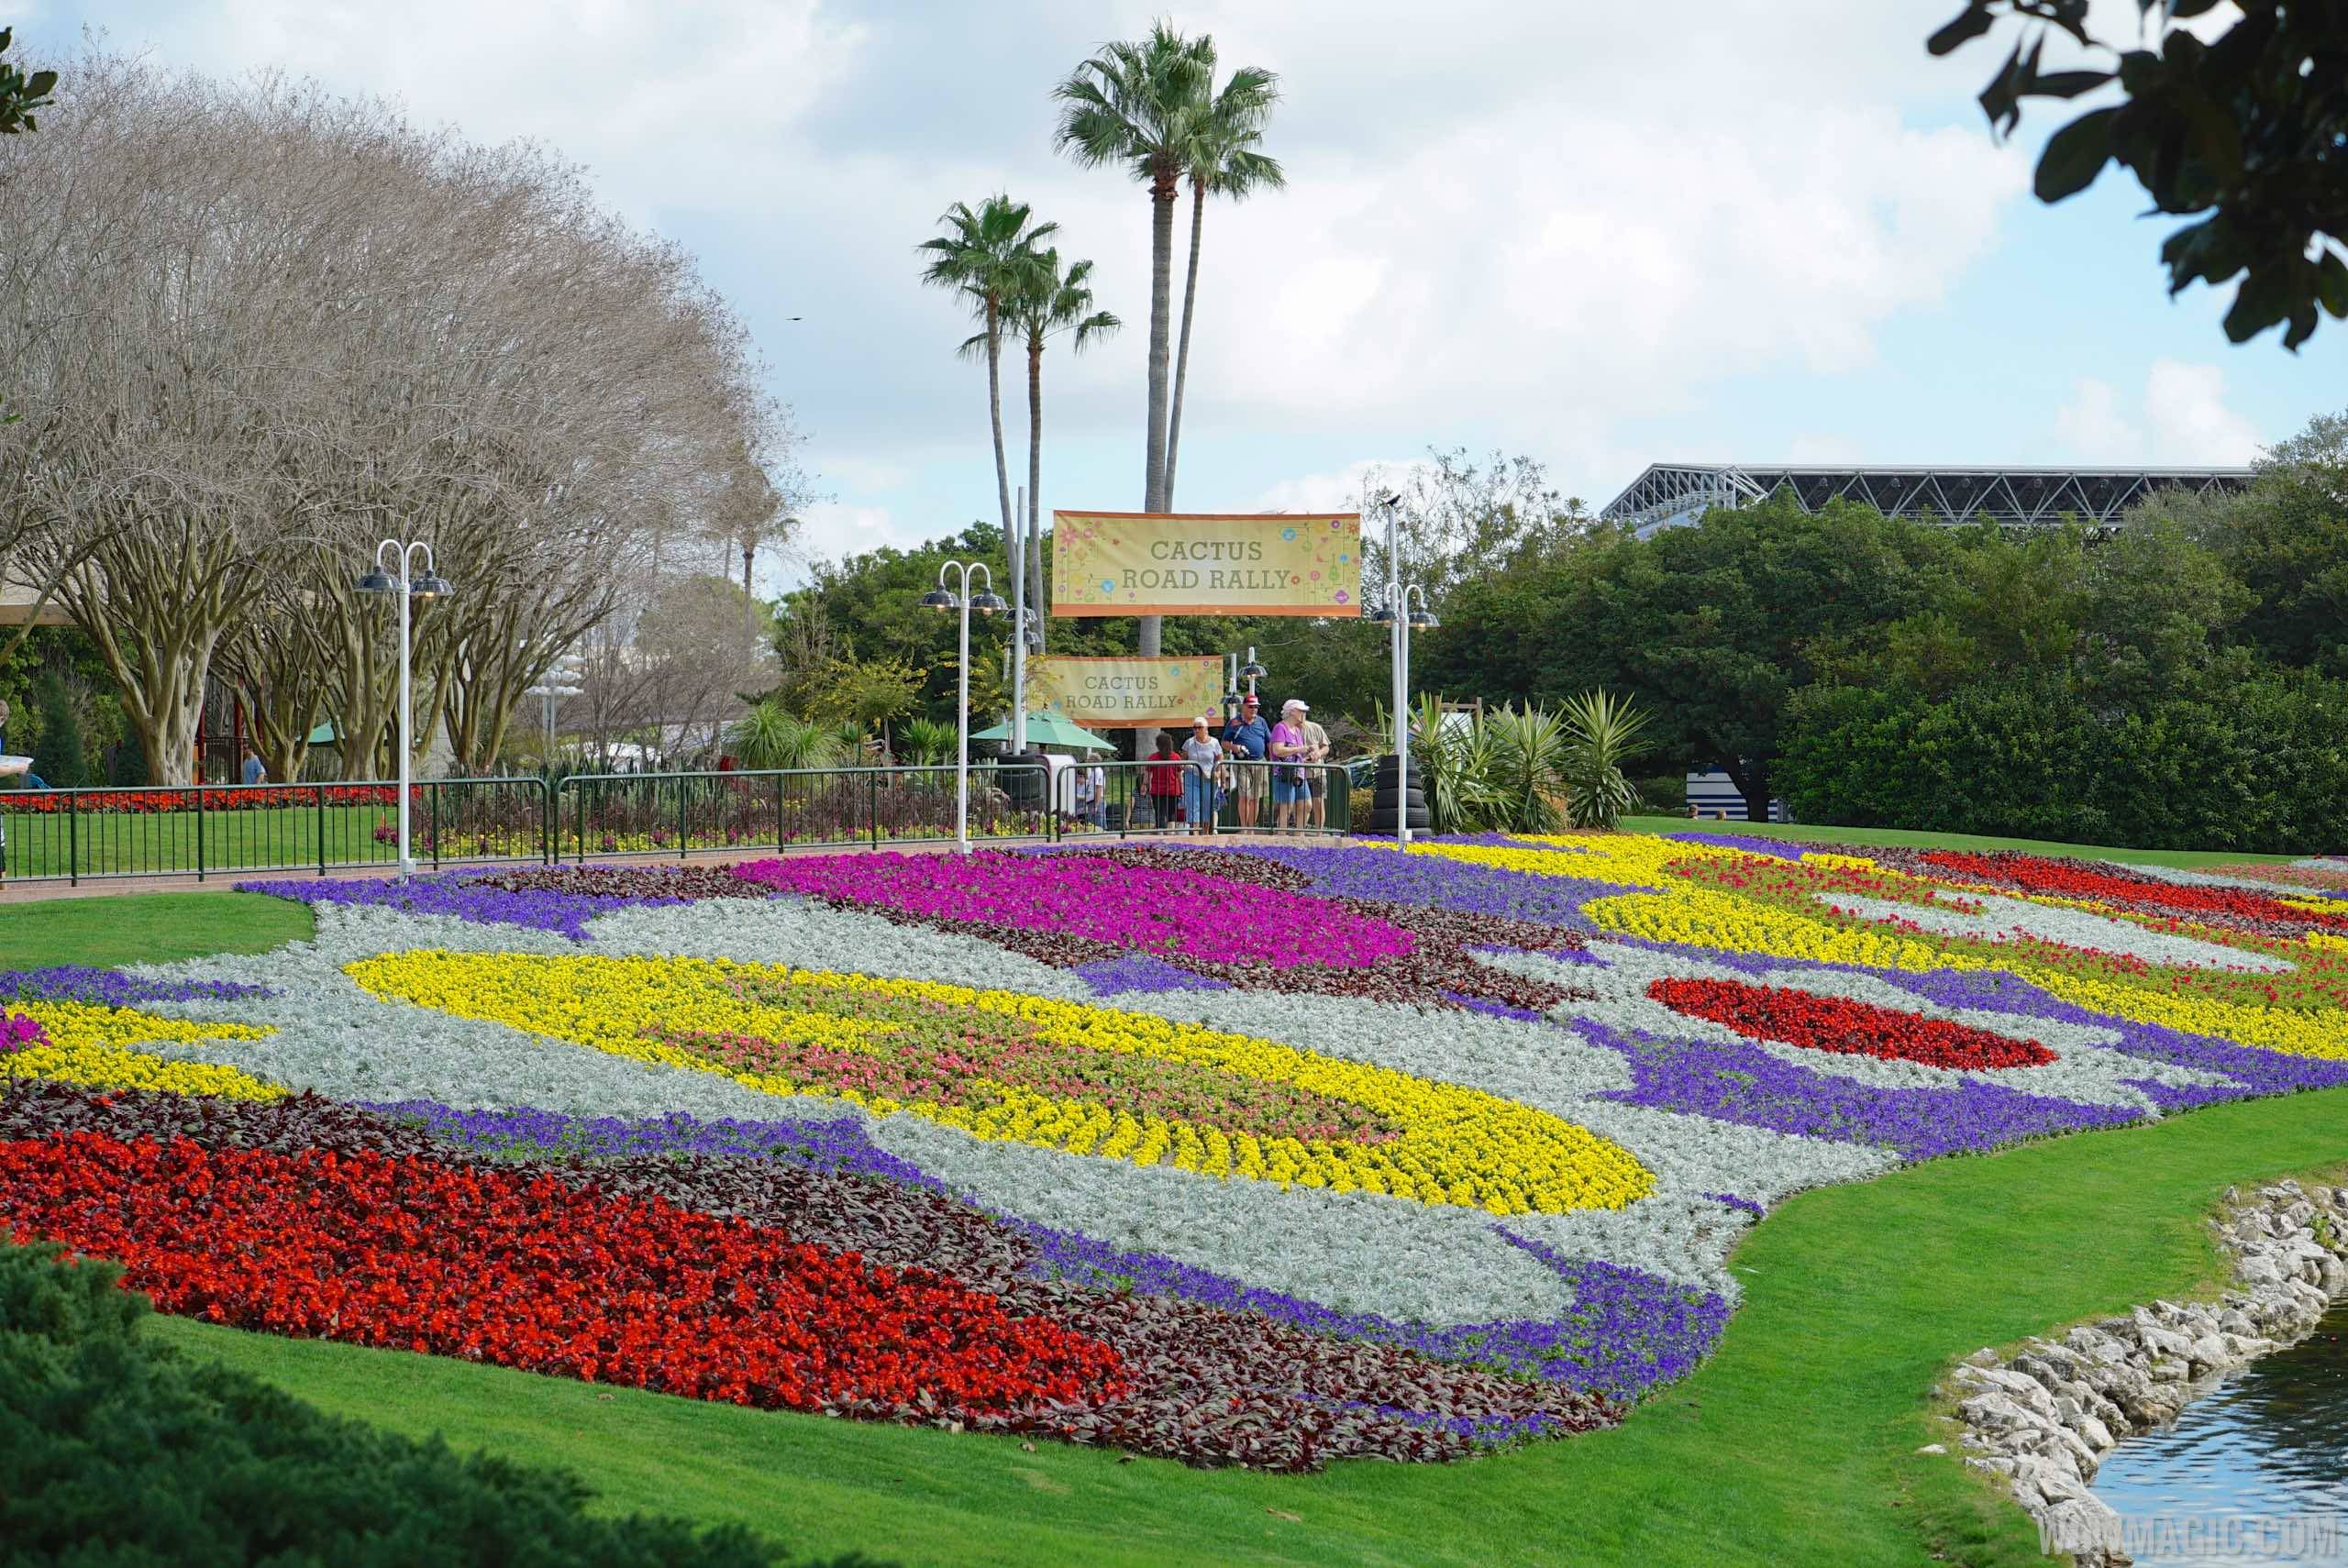 2015 Epcot Flower and Garden Festival - Floral display